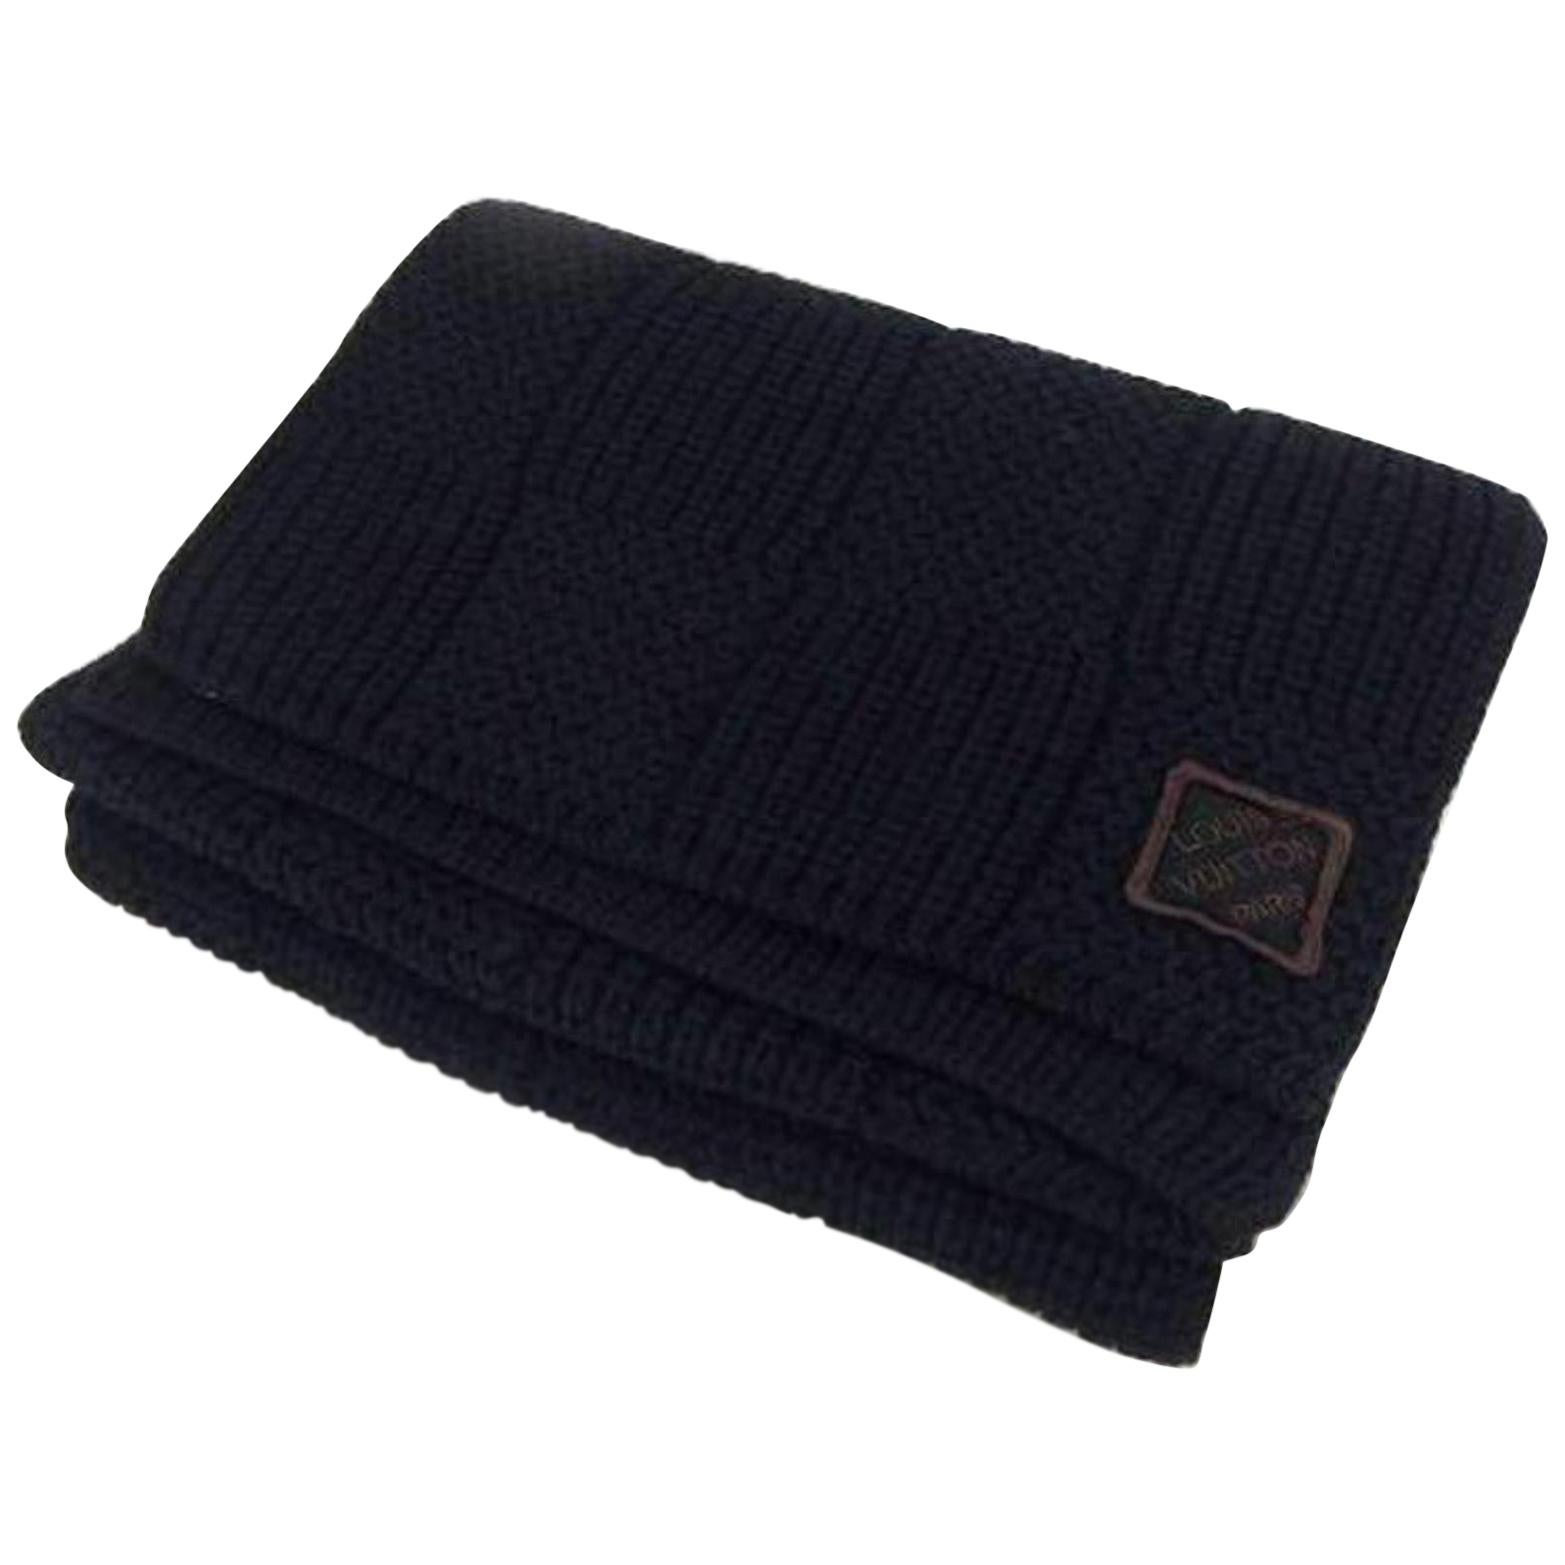 Louis Vuitton Black Knitted Damier 225006 Scarf/Wrap For Sale